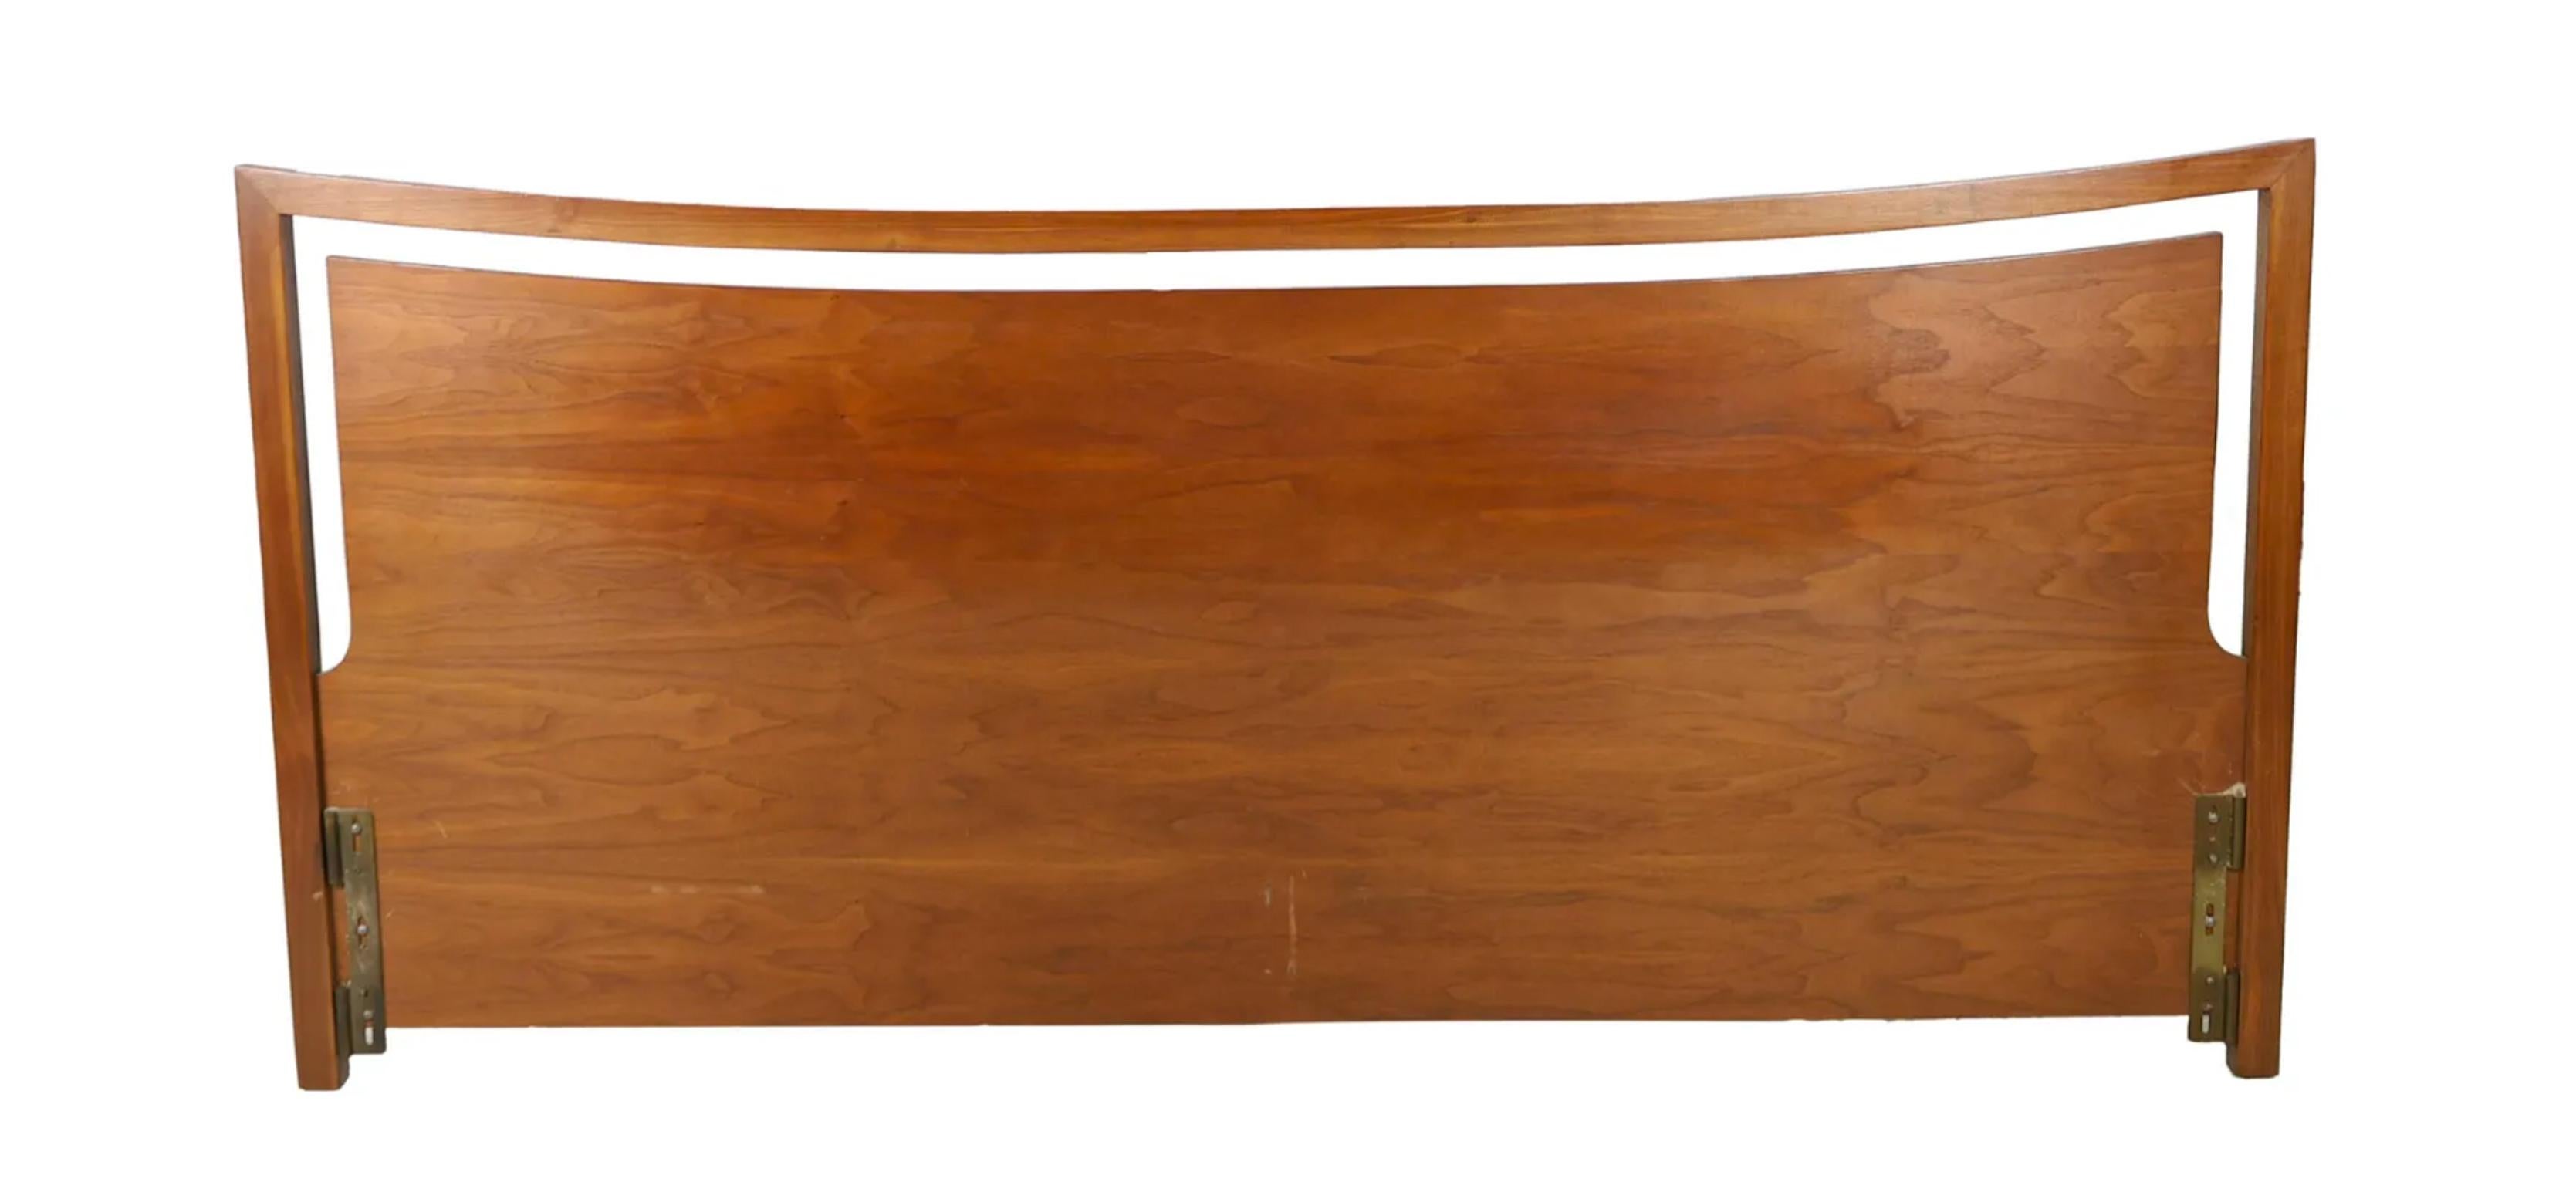 American Beautiful Mid-Century Walnut King Bed Headboard curved Design For Sale